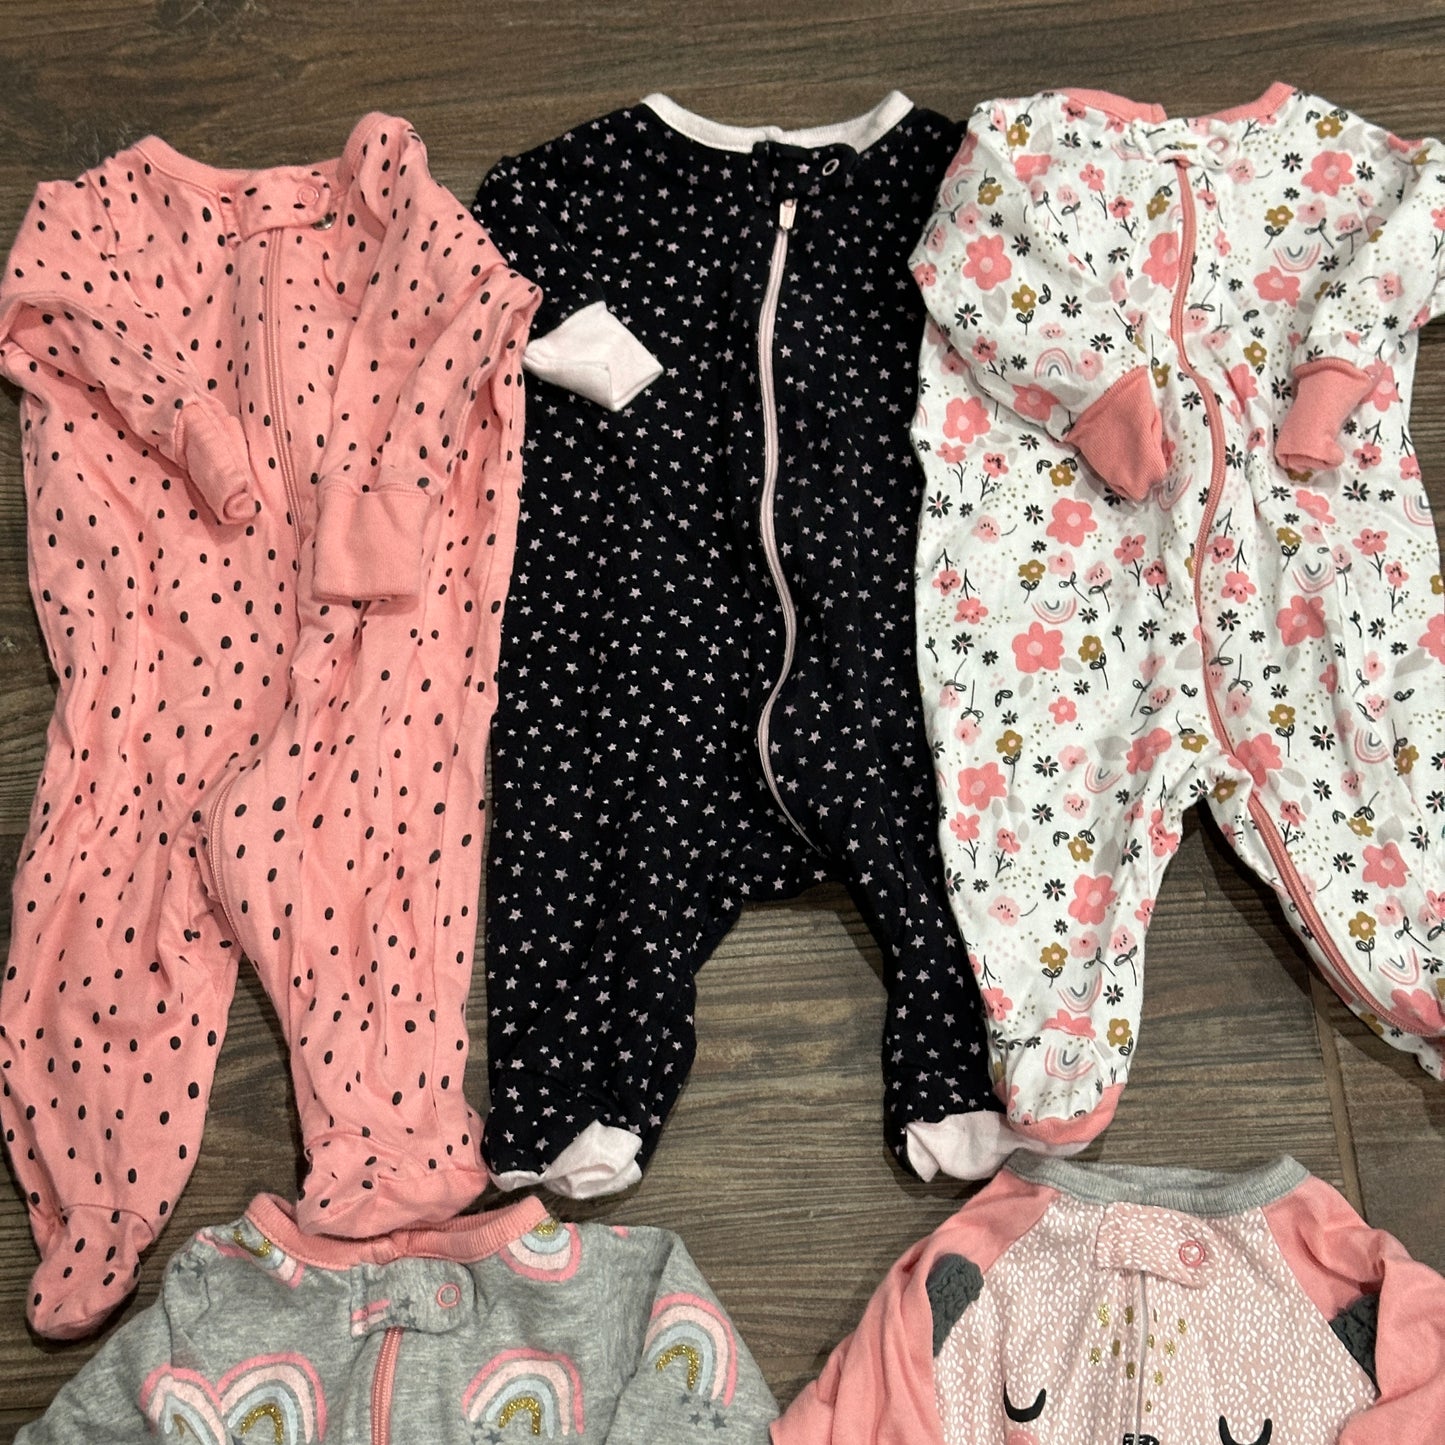 Girls Size Newborn Gerber Footie Lot (5 Pieces) - Good Used Condition